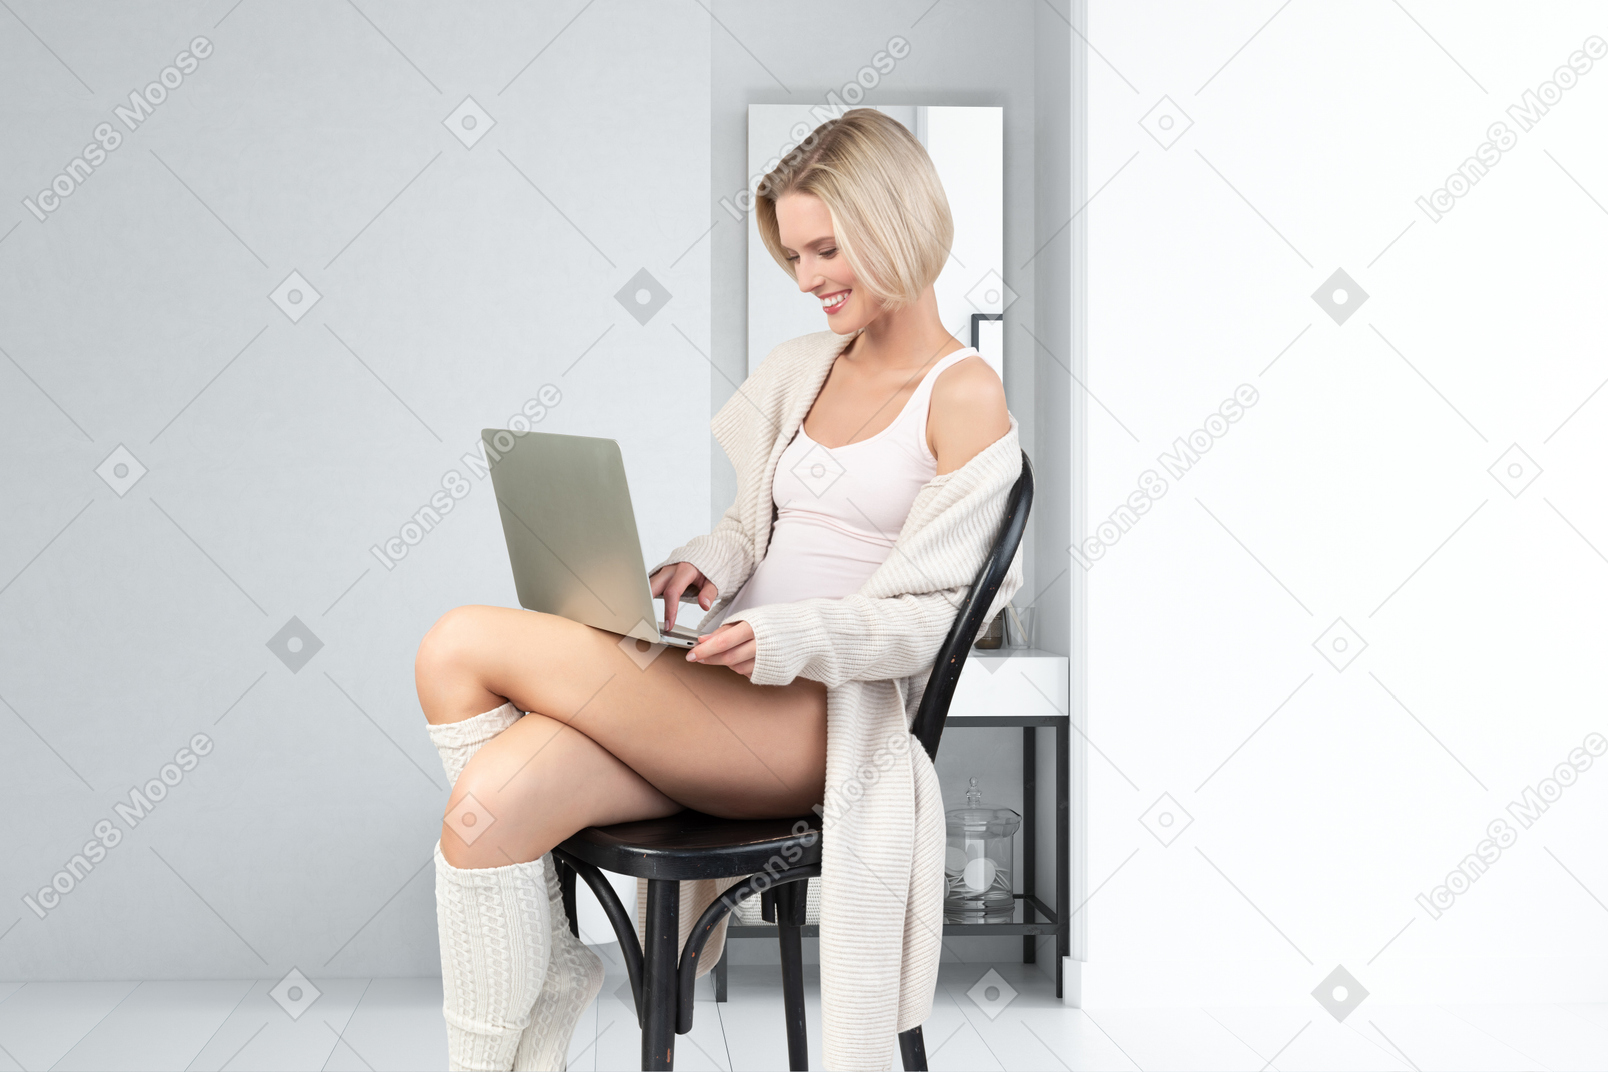 A woman sitting on a chair using a laptop computer